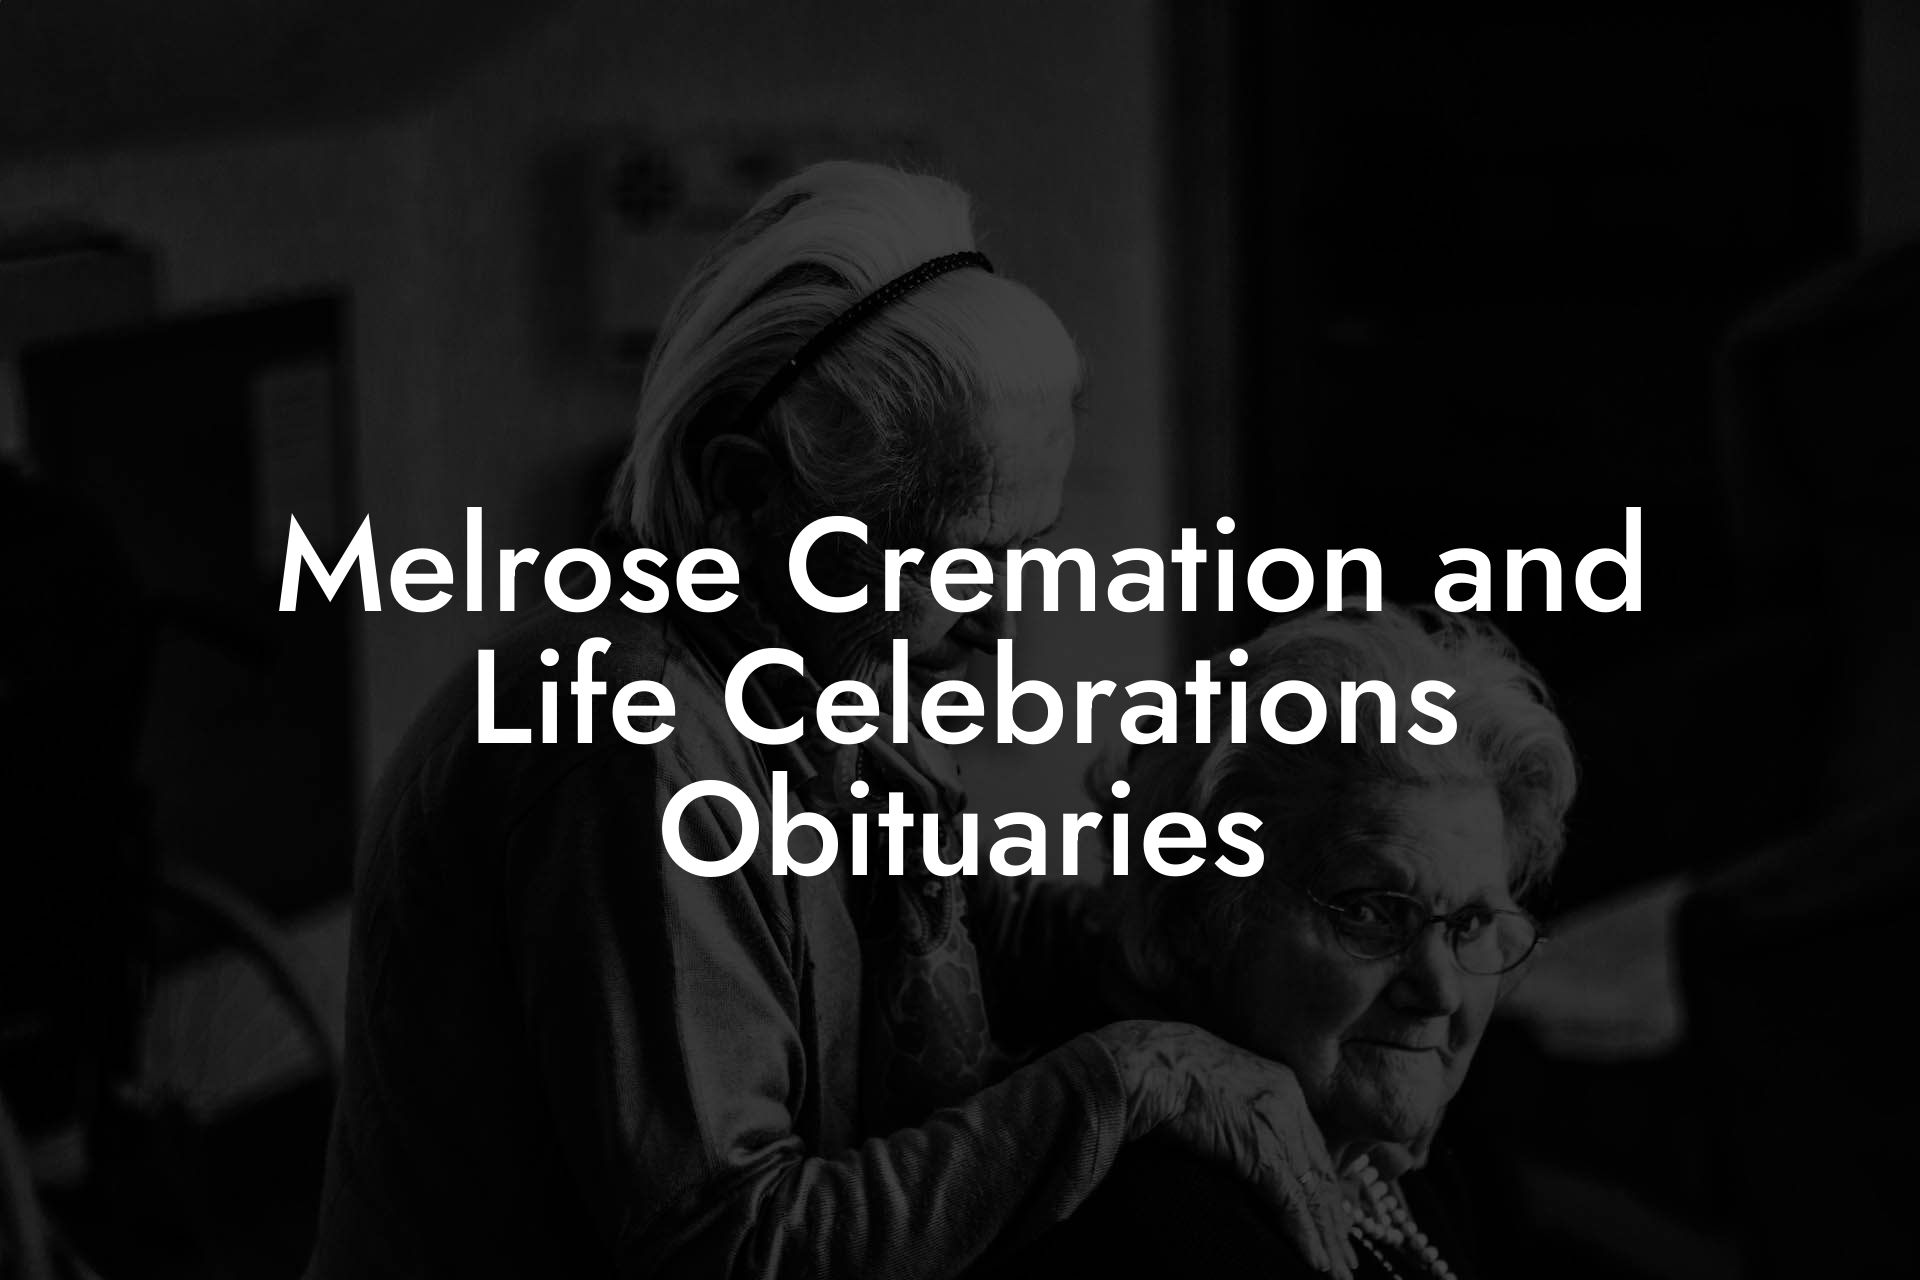 Melrose Cremation and Life Celebrations Obituaries